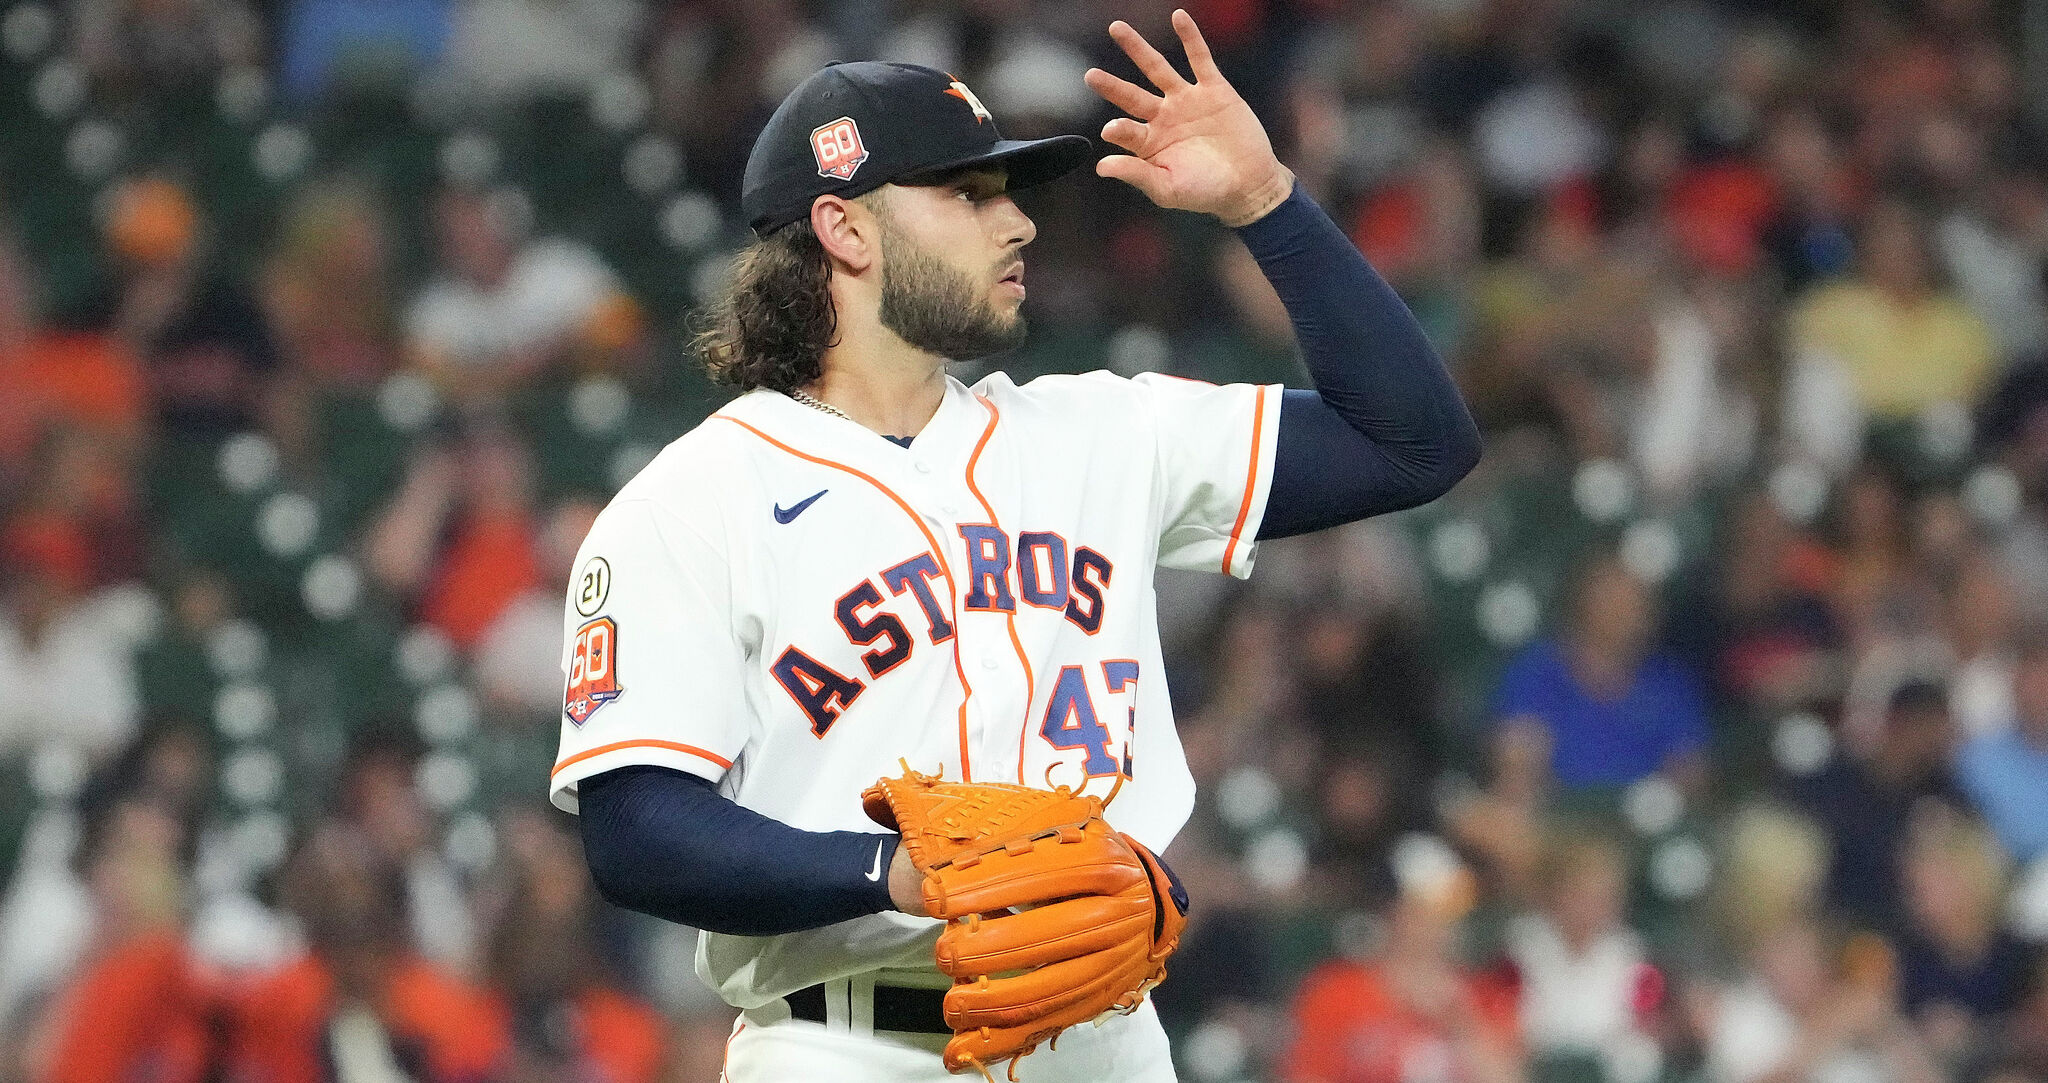 Houston Astros: Lance McCullers Jr. is in playoff form